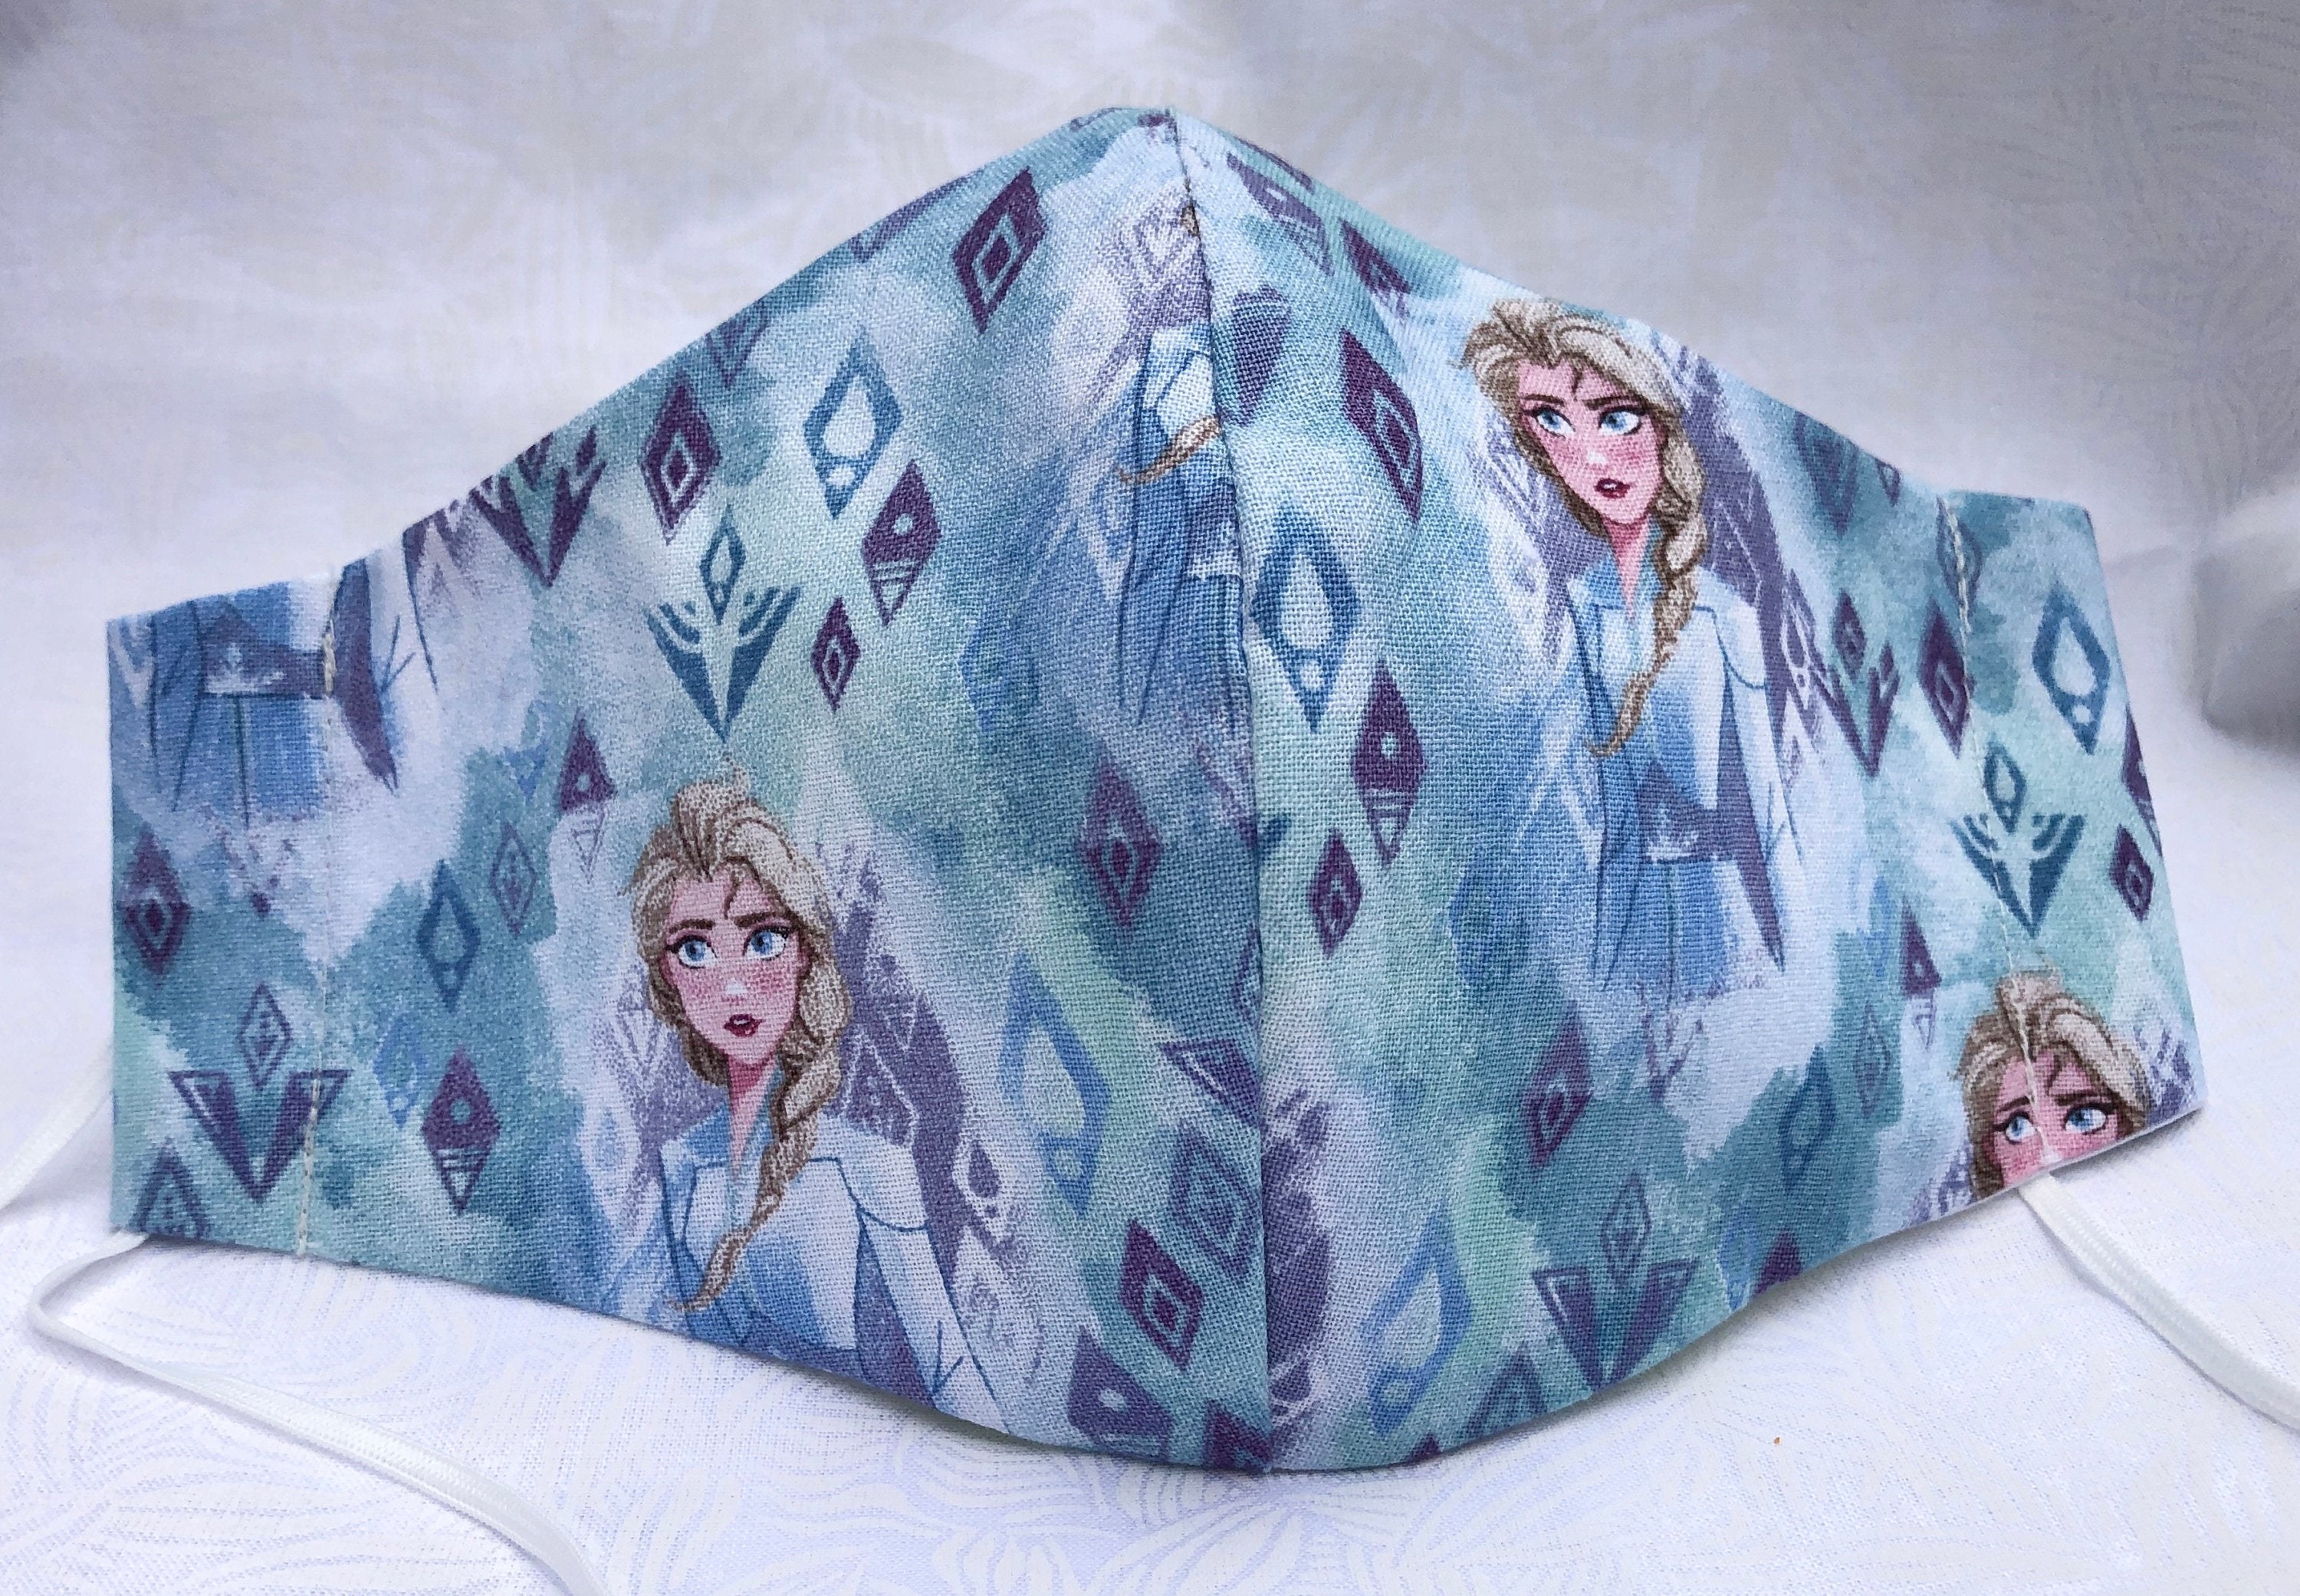 a light blue watercolored-like mask with elsa on it